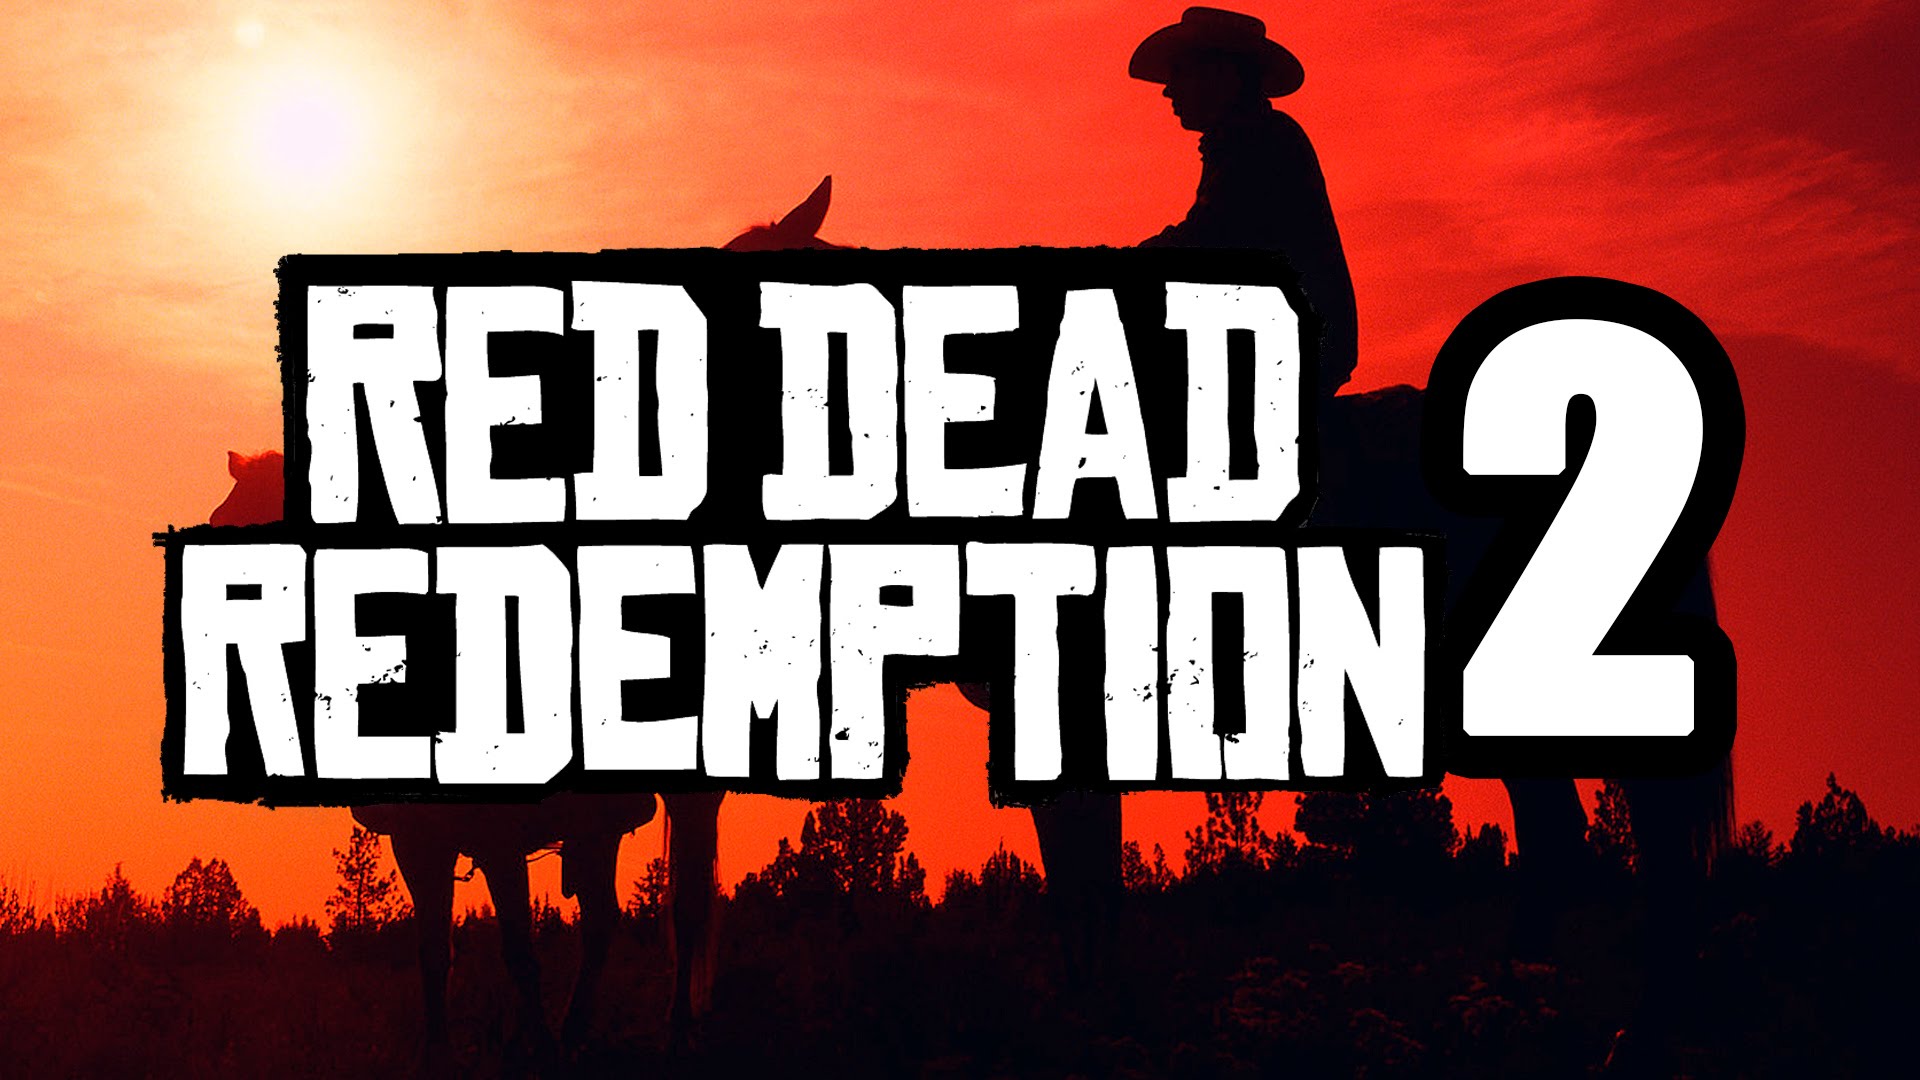 red-dead-redemption-ign-review-video-moddb